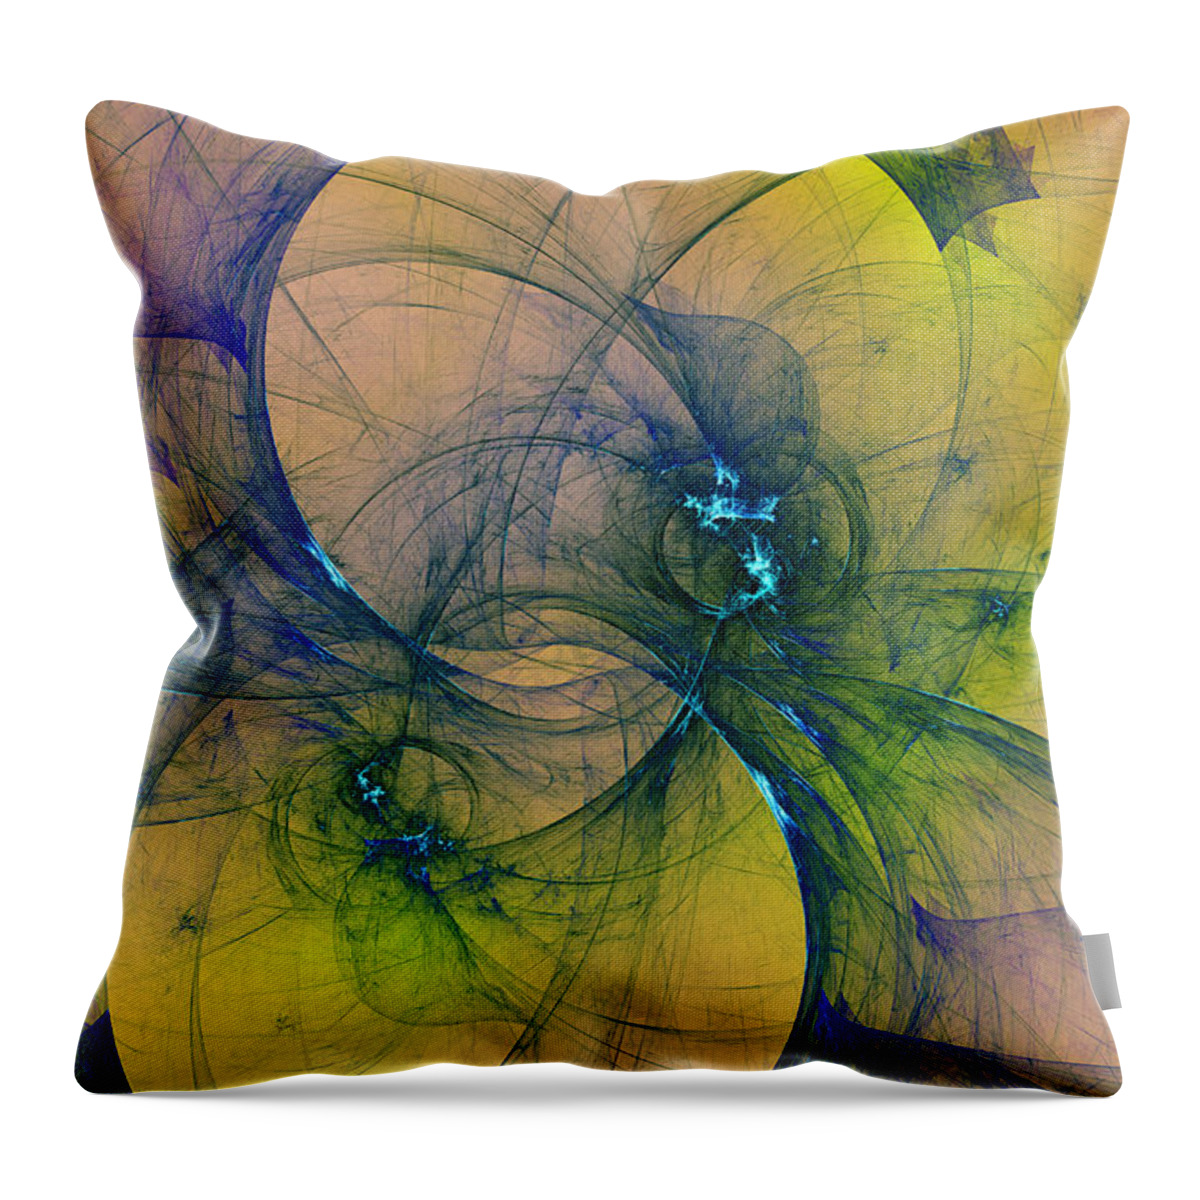 Art Throw Pillow featuring the digital art Animus in consulendo liber by Jeff Iverson